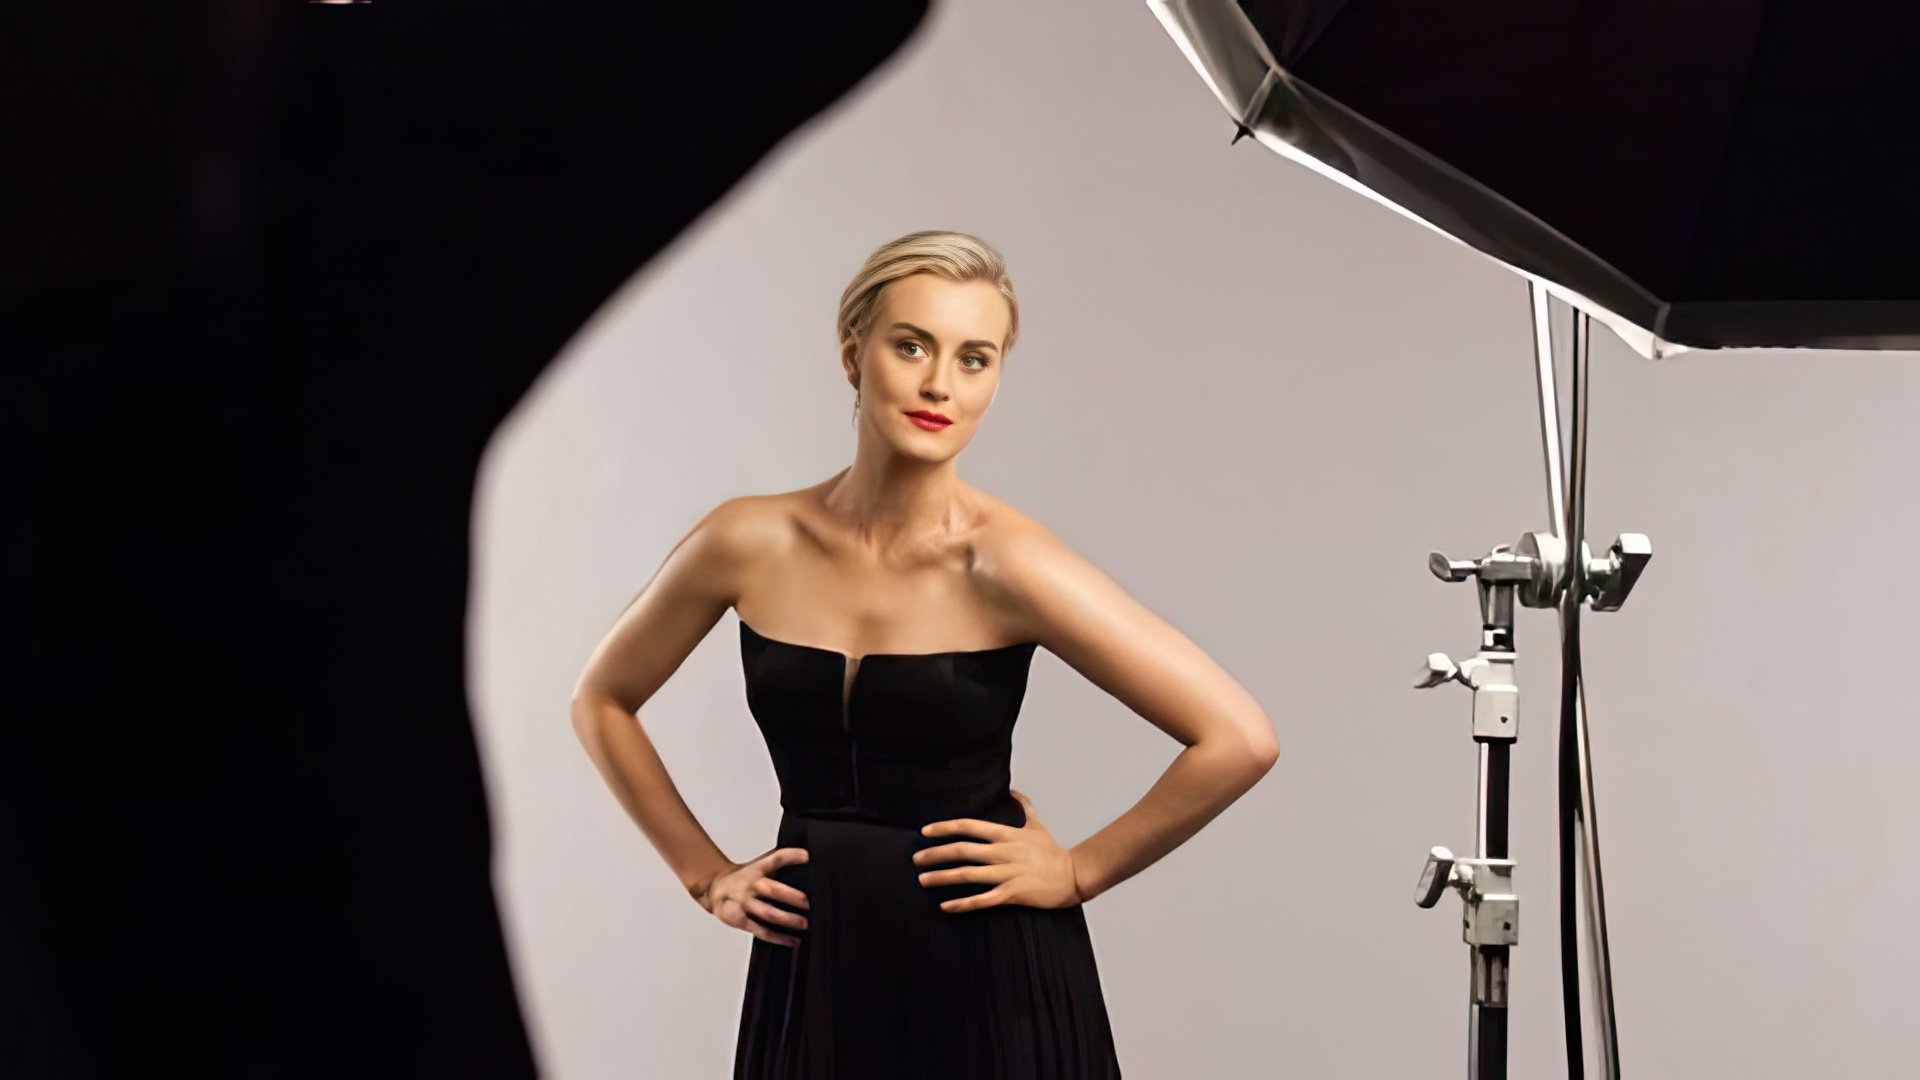 Taylor Schilling's height is 173 cm